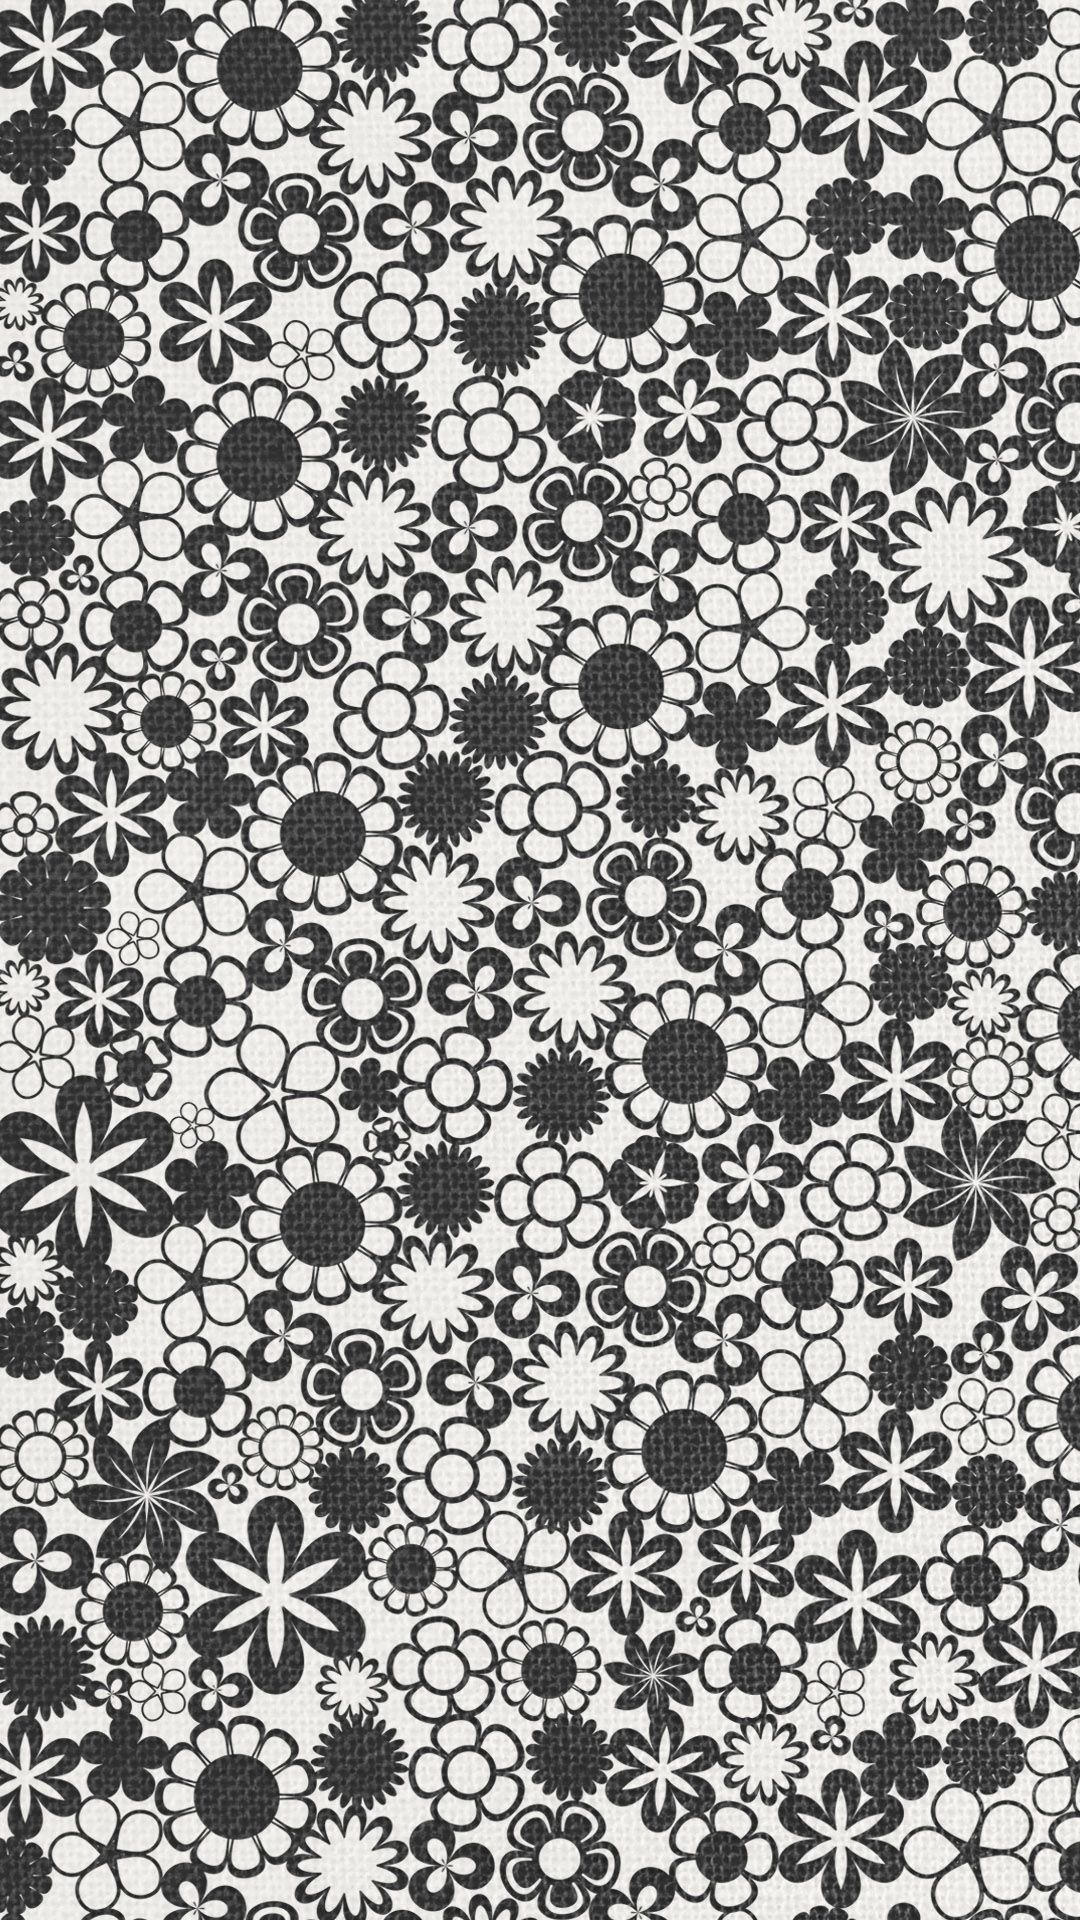 iPhone 6 Wallpapers: Flower Patterns - iPhone6wp.com